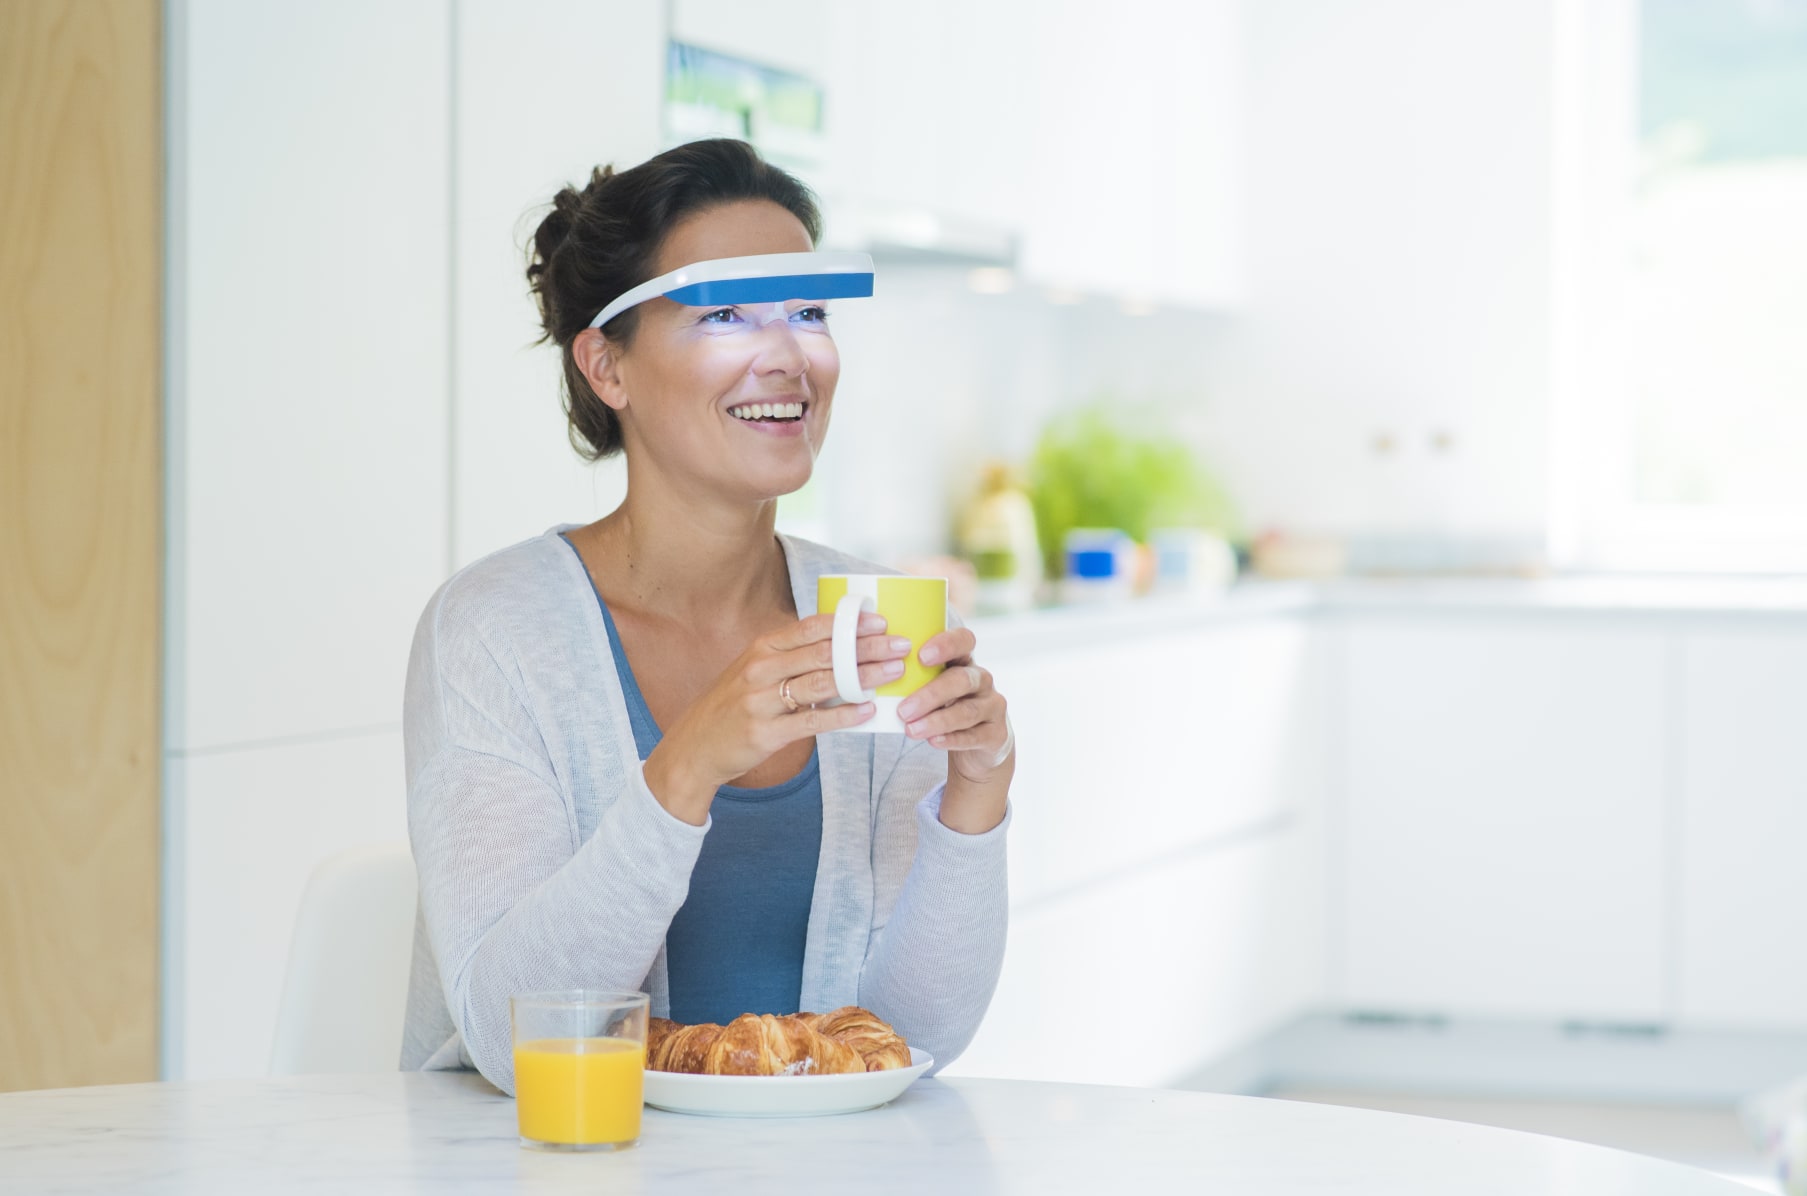 Luminette 3 - World's First Light Therapy Glasses